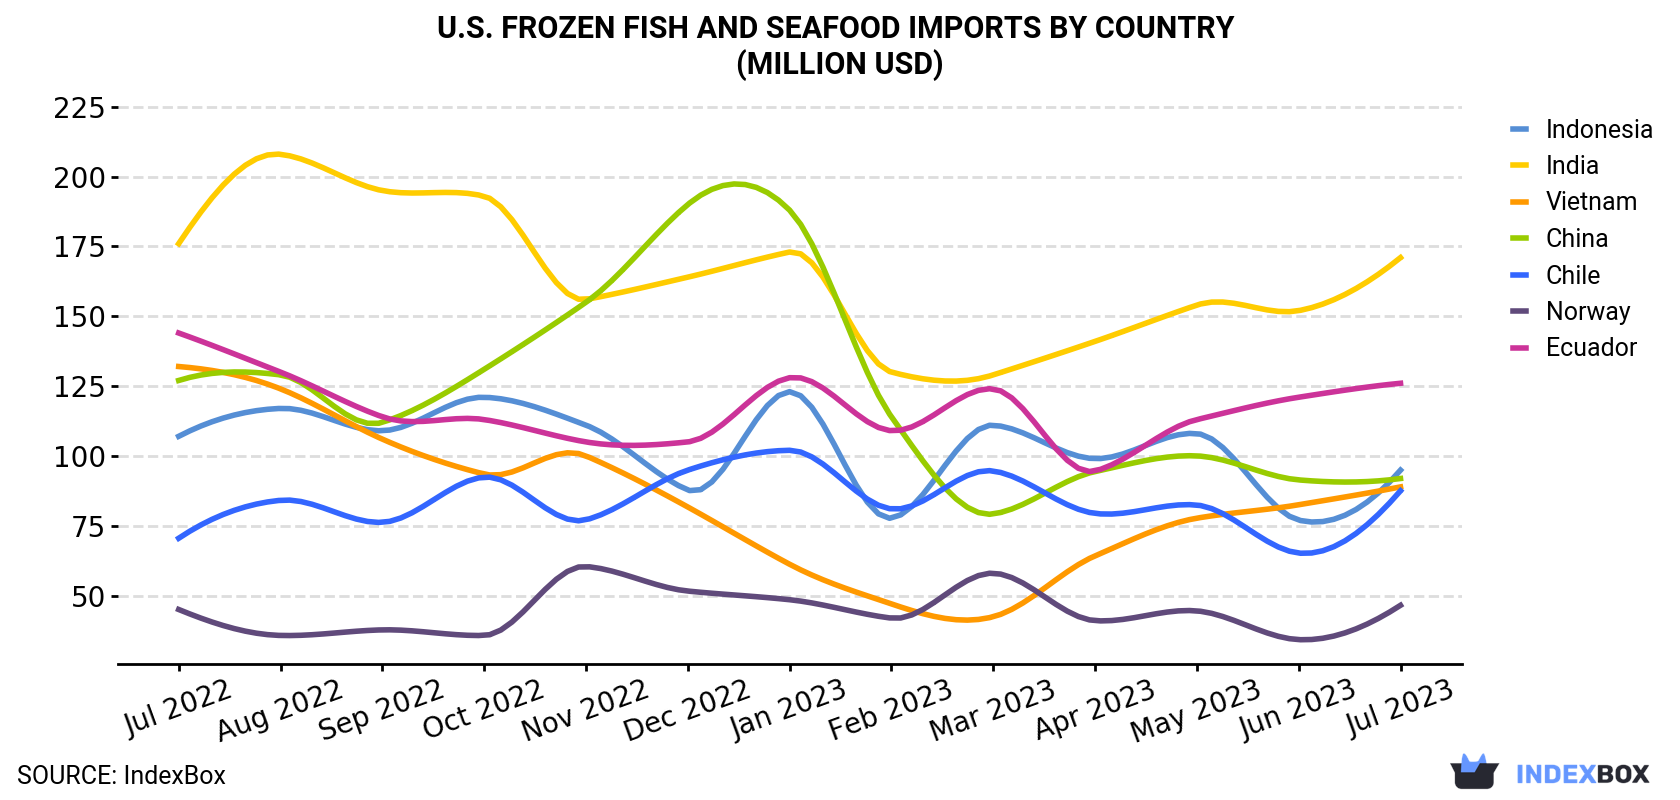 U.S. Frozen Fish And Seafood Imports By Country (Million USD)